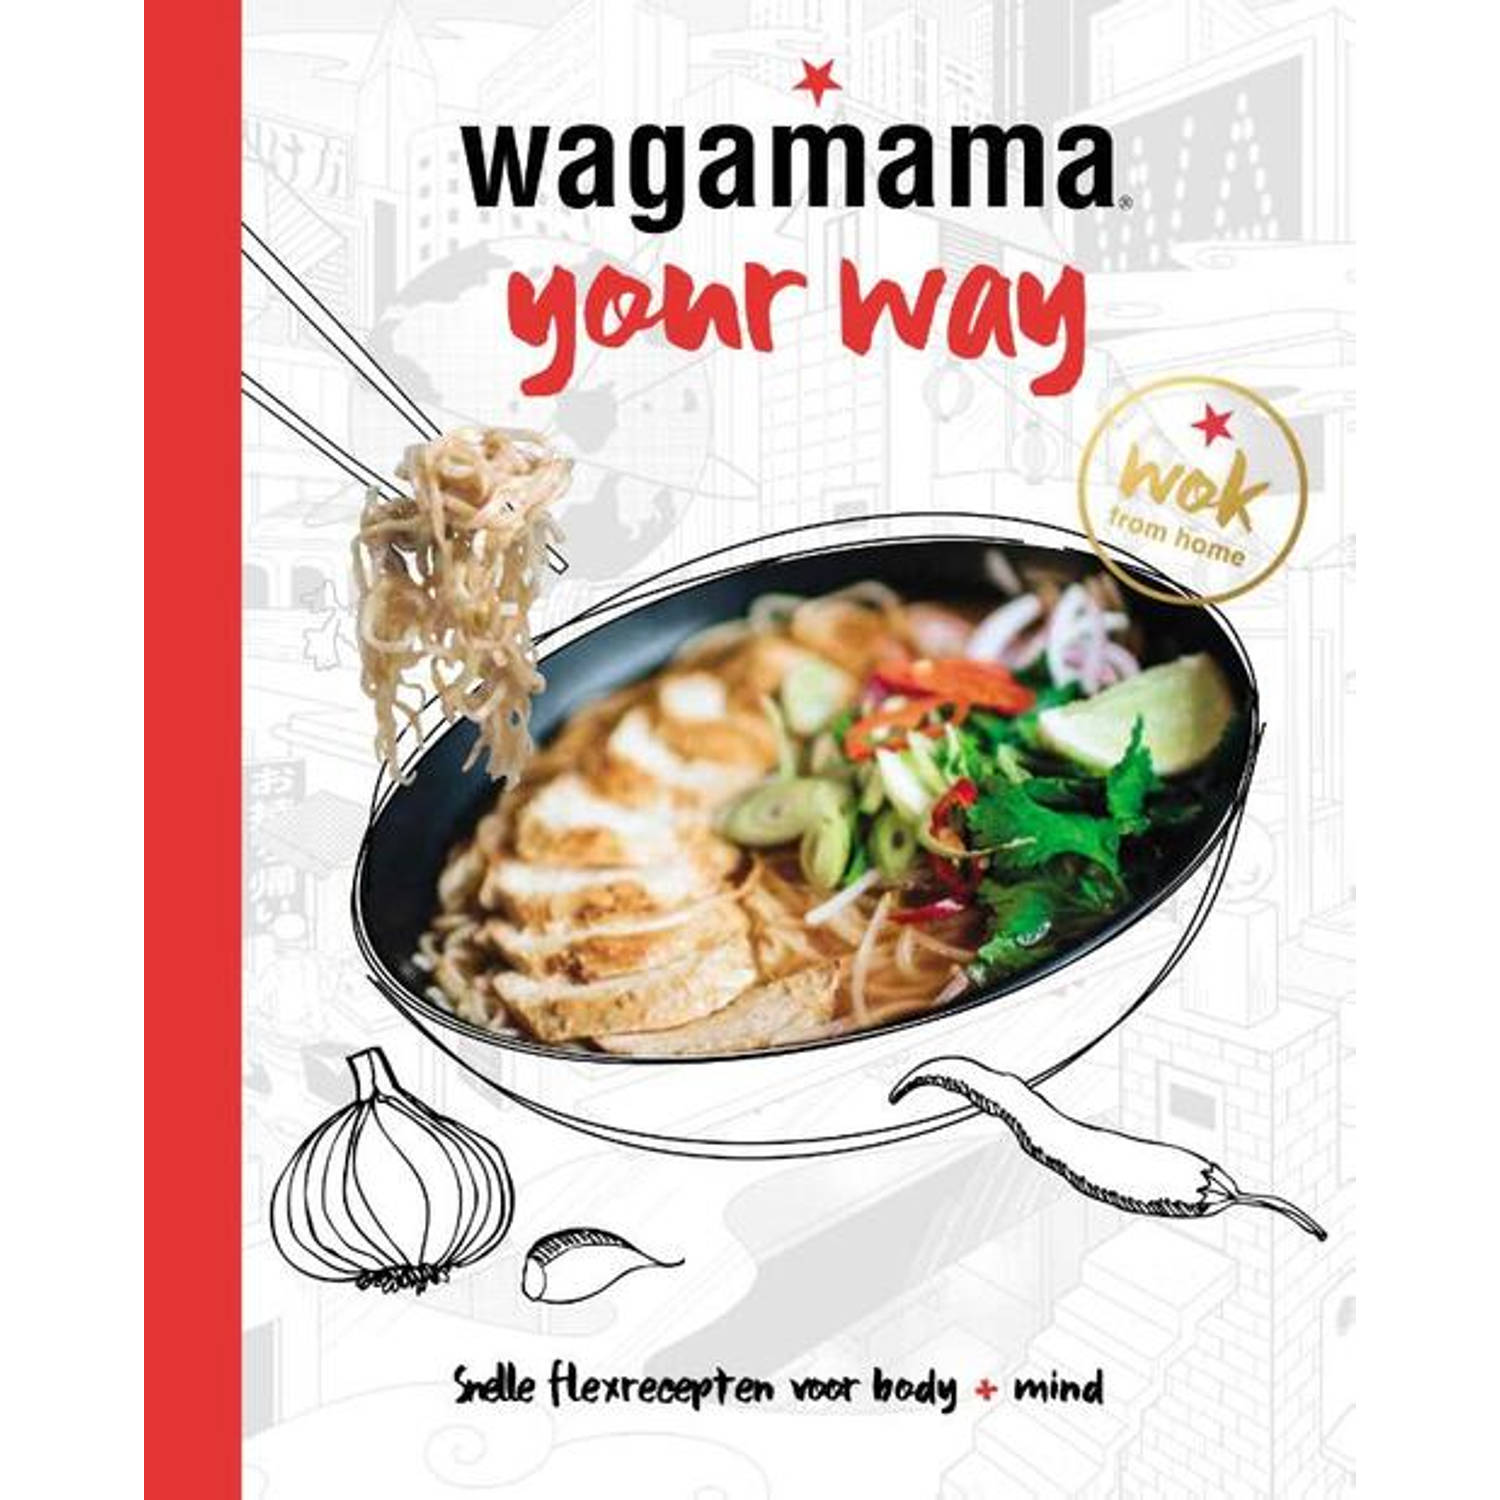 Wagamama Your Way. Snelle flexrecepten voor body + mind, Wagamama, Hardcover